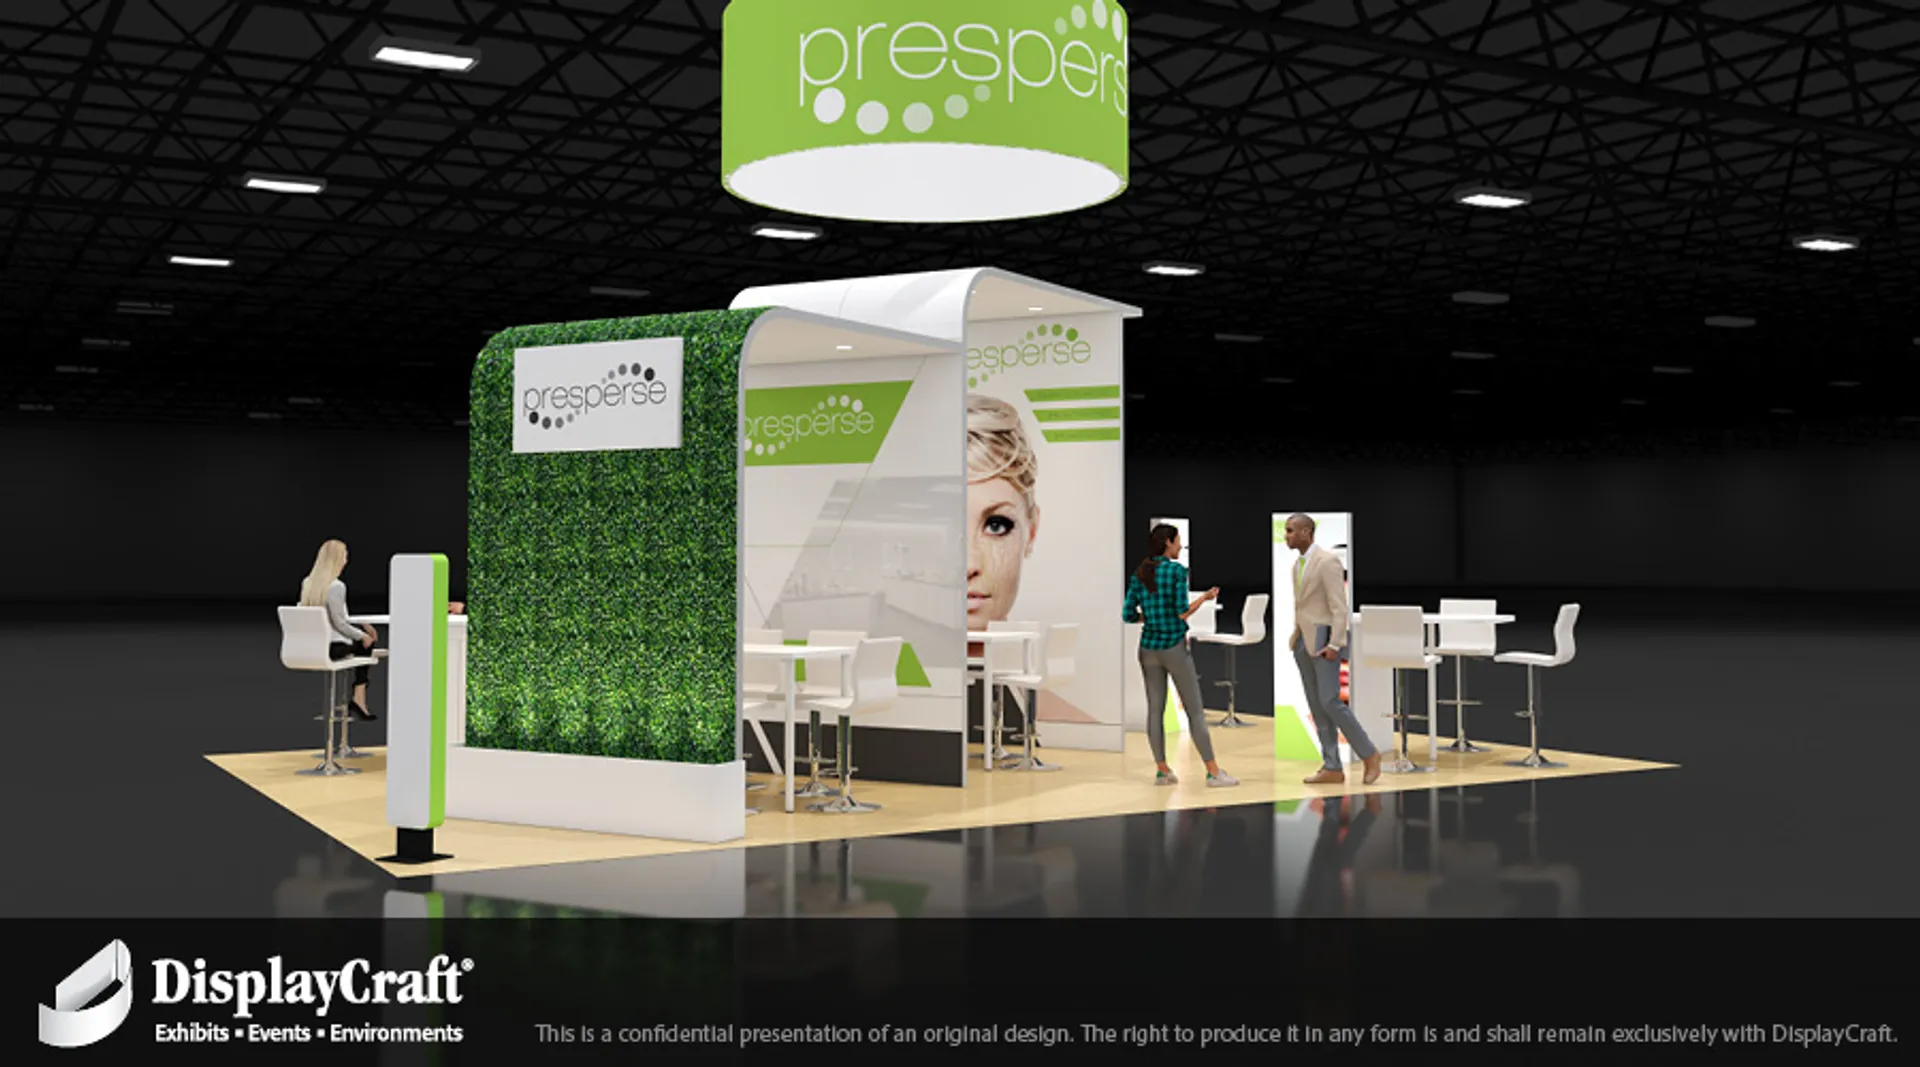 booth-design-projects/DisplayCraft/2024-04-03-20x30-ISLAND-Project-77/Presperse 1-vb2zfn.jpg